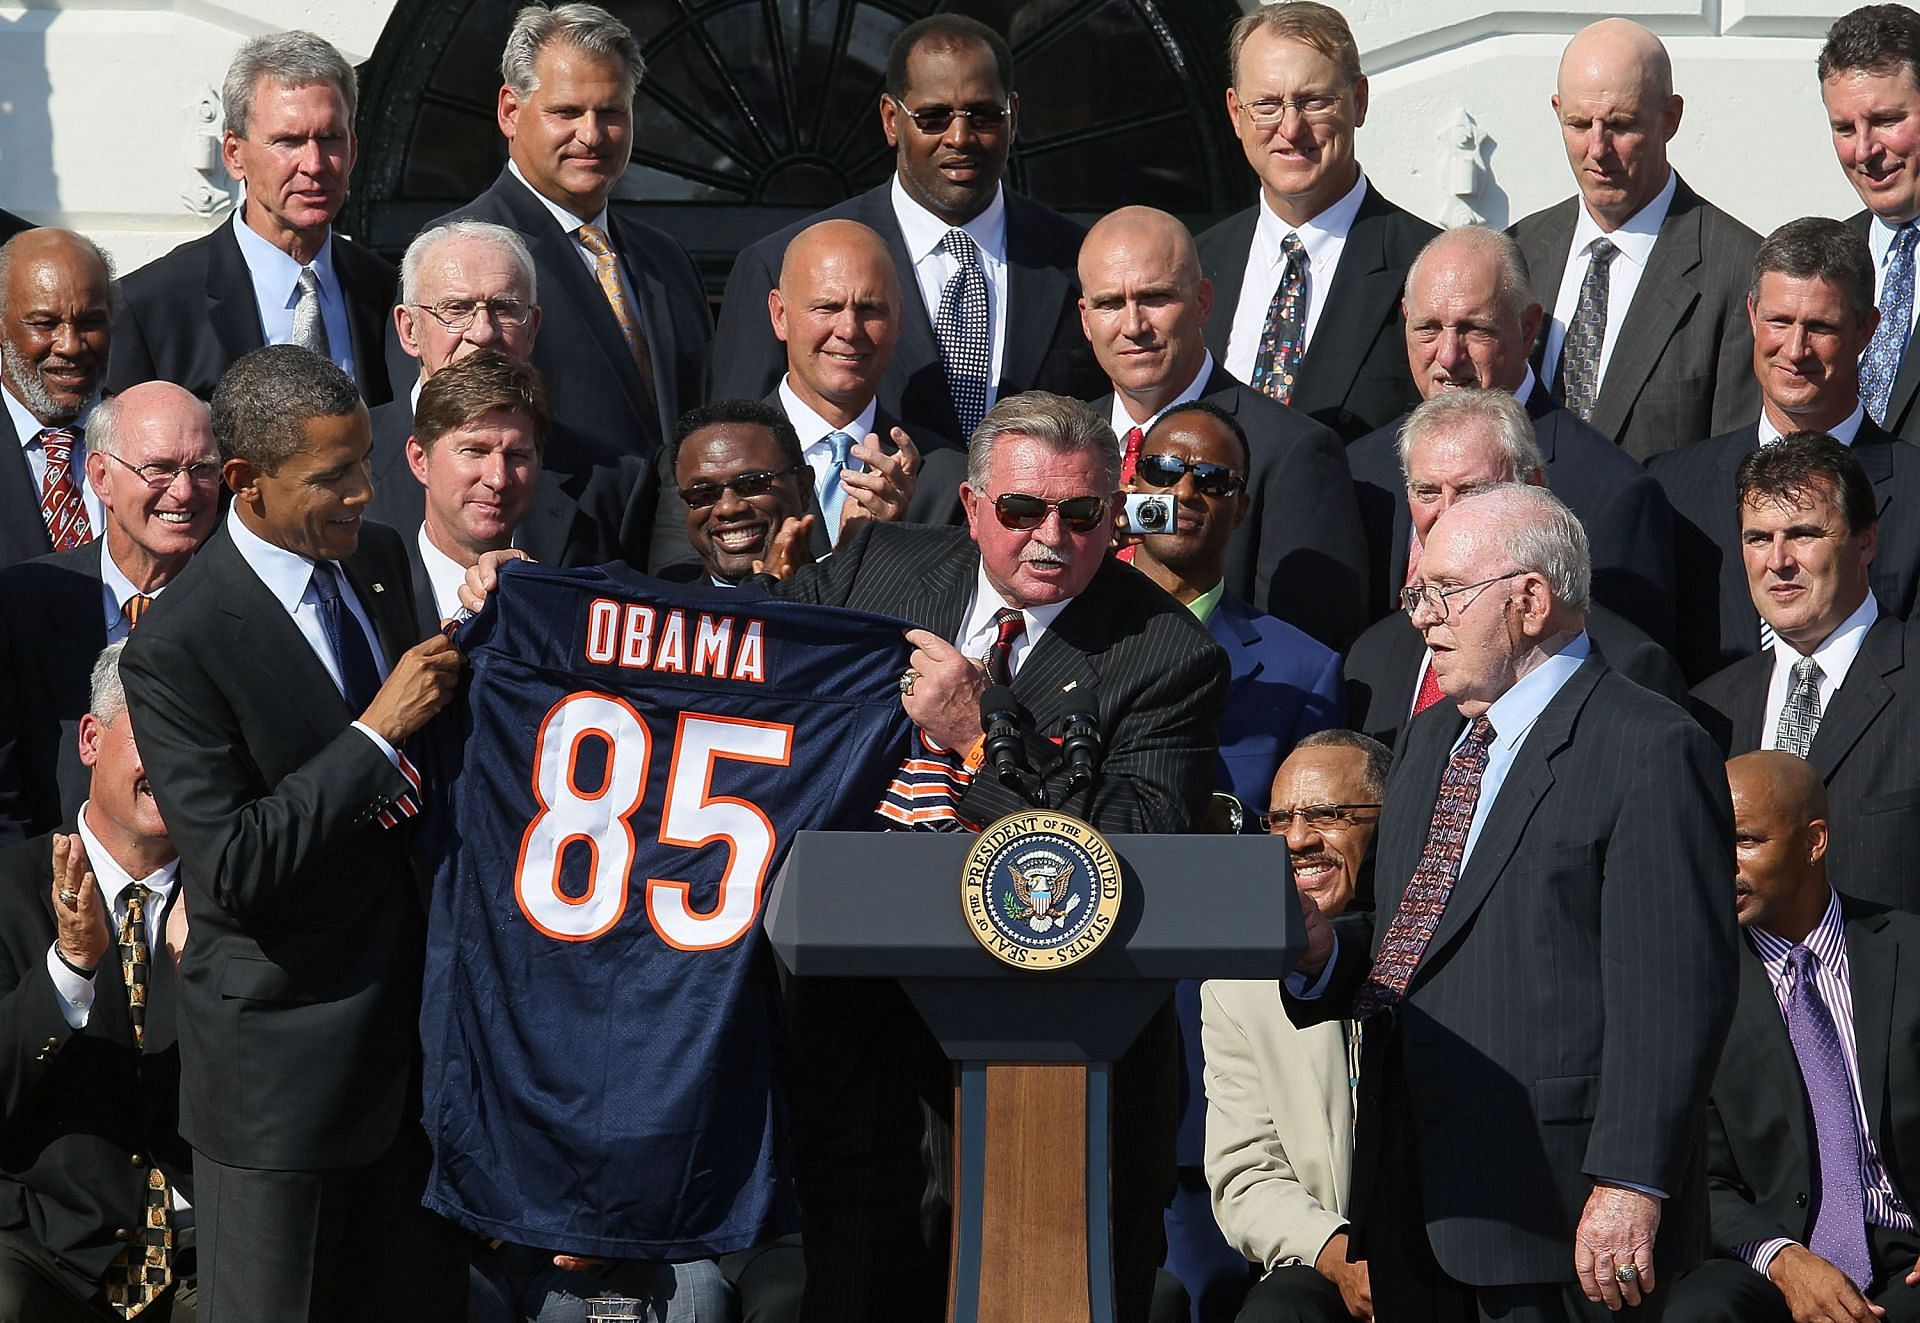 Obama Welcomes 1985 NFL Champion Chicago Bears To The White House